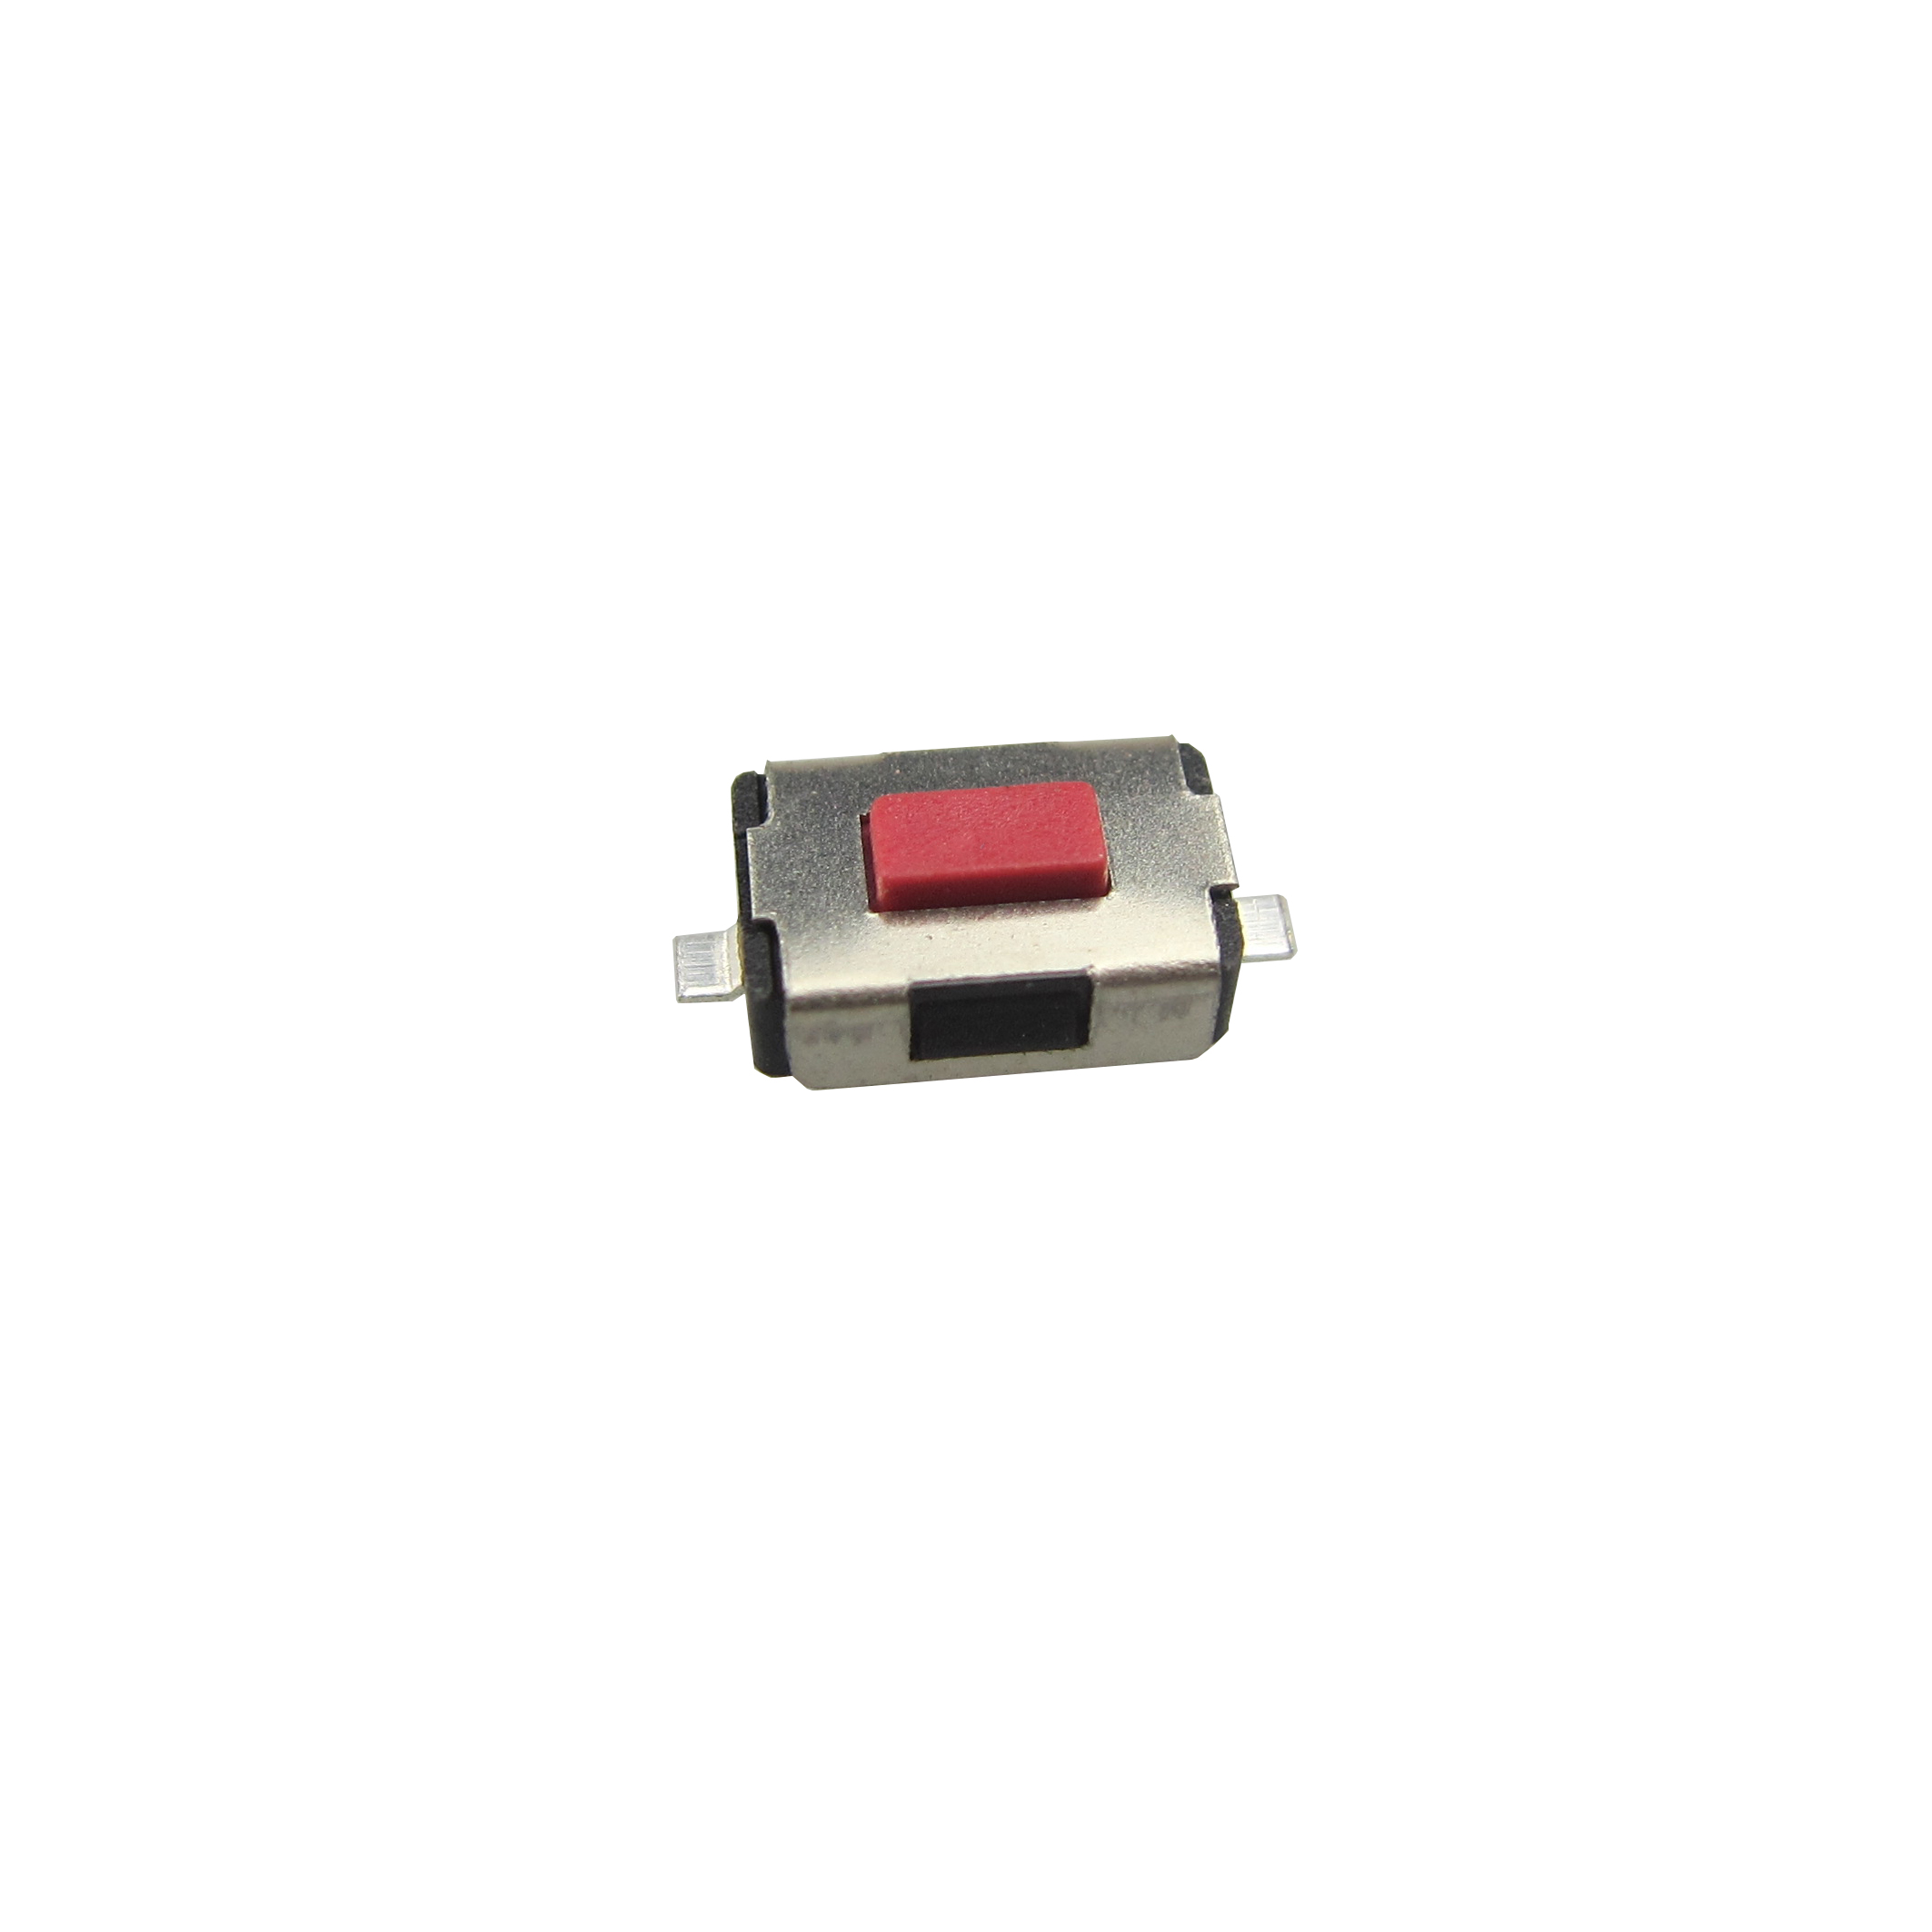 Gangyuan SMD 3.6*6 Red Sterm Tact Switch